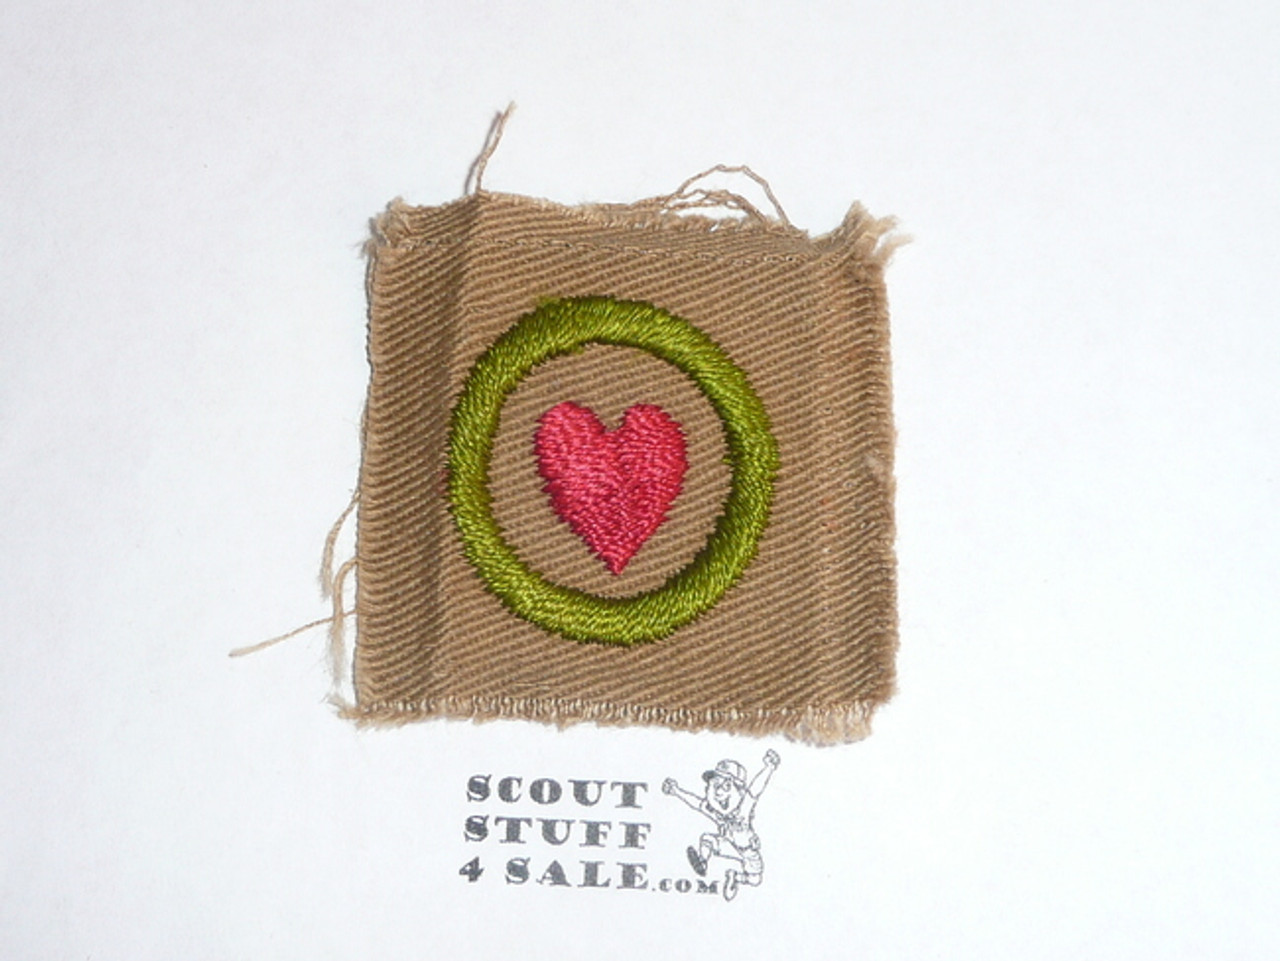 Personal Health - Type A - Square Tan Merit Badge (1911-1933), lt use #2